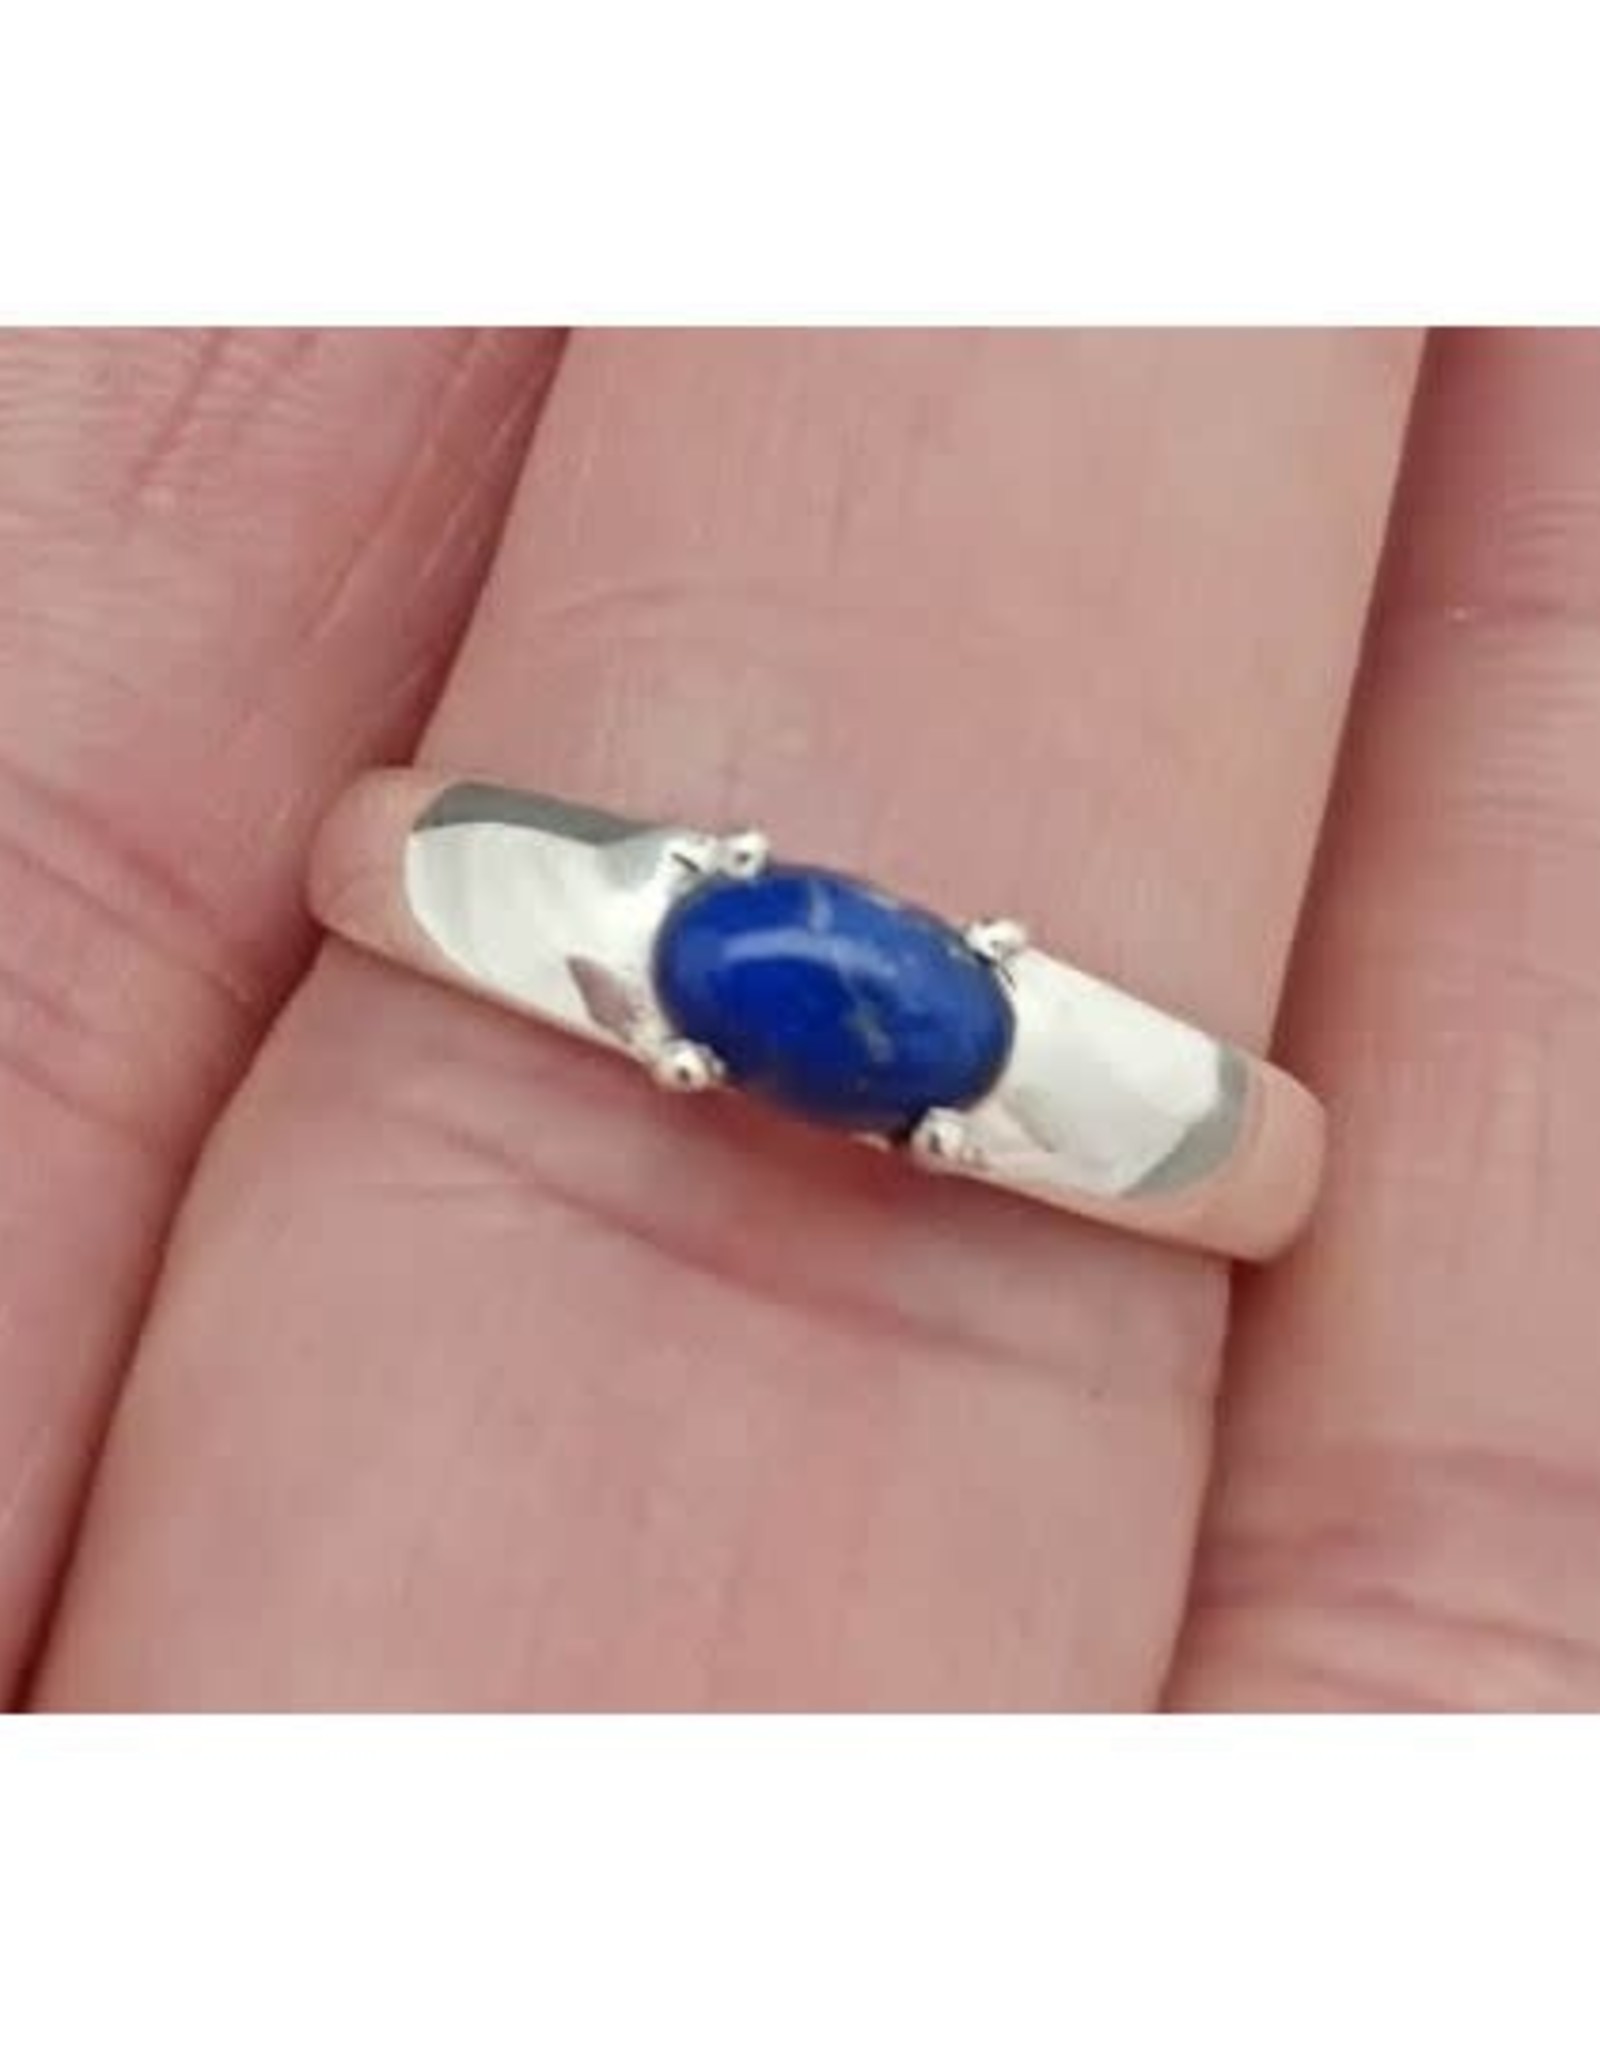 Lapis Lazuli Ring A - Size 10 Sterling Silver